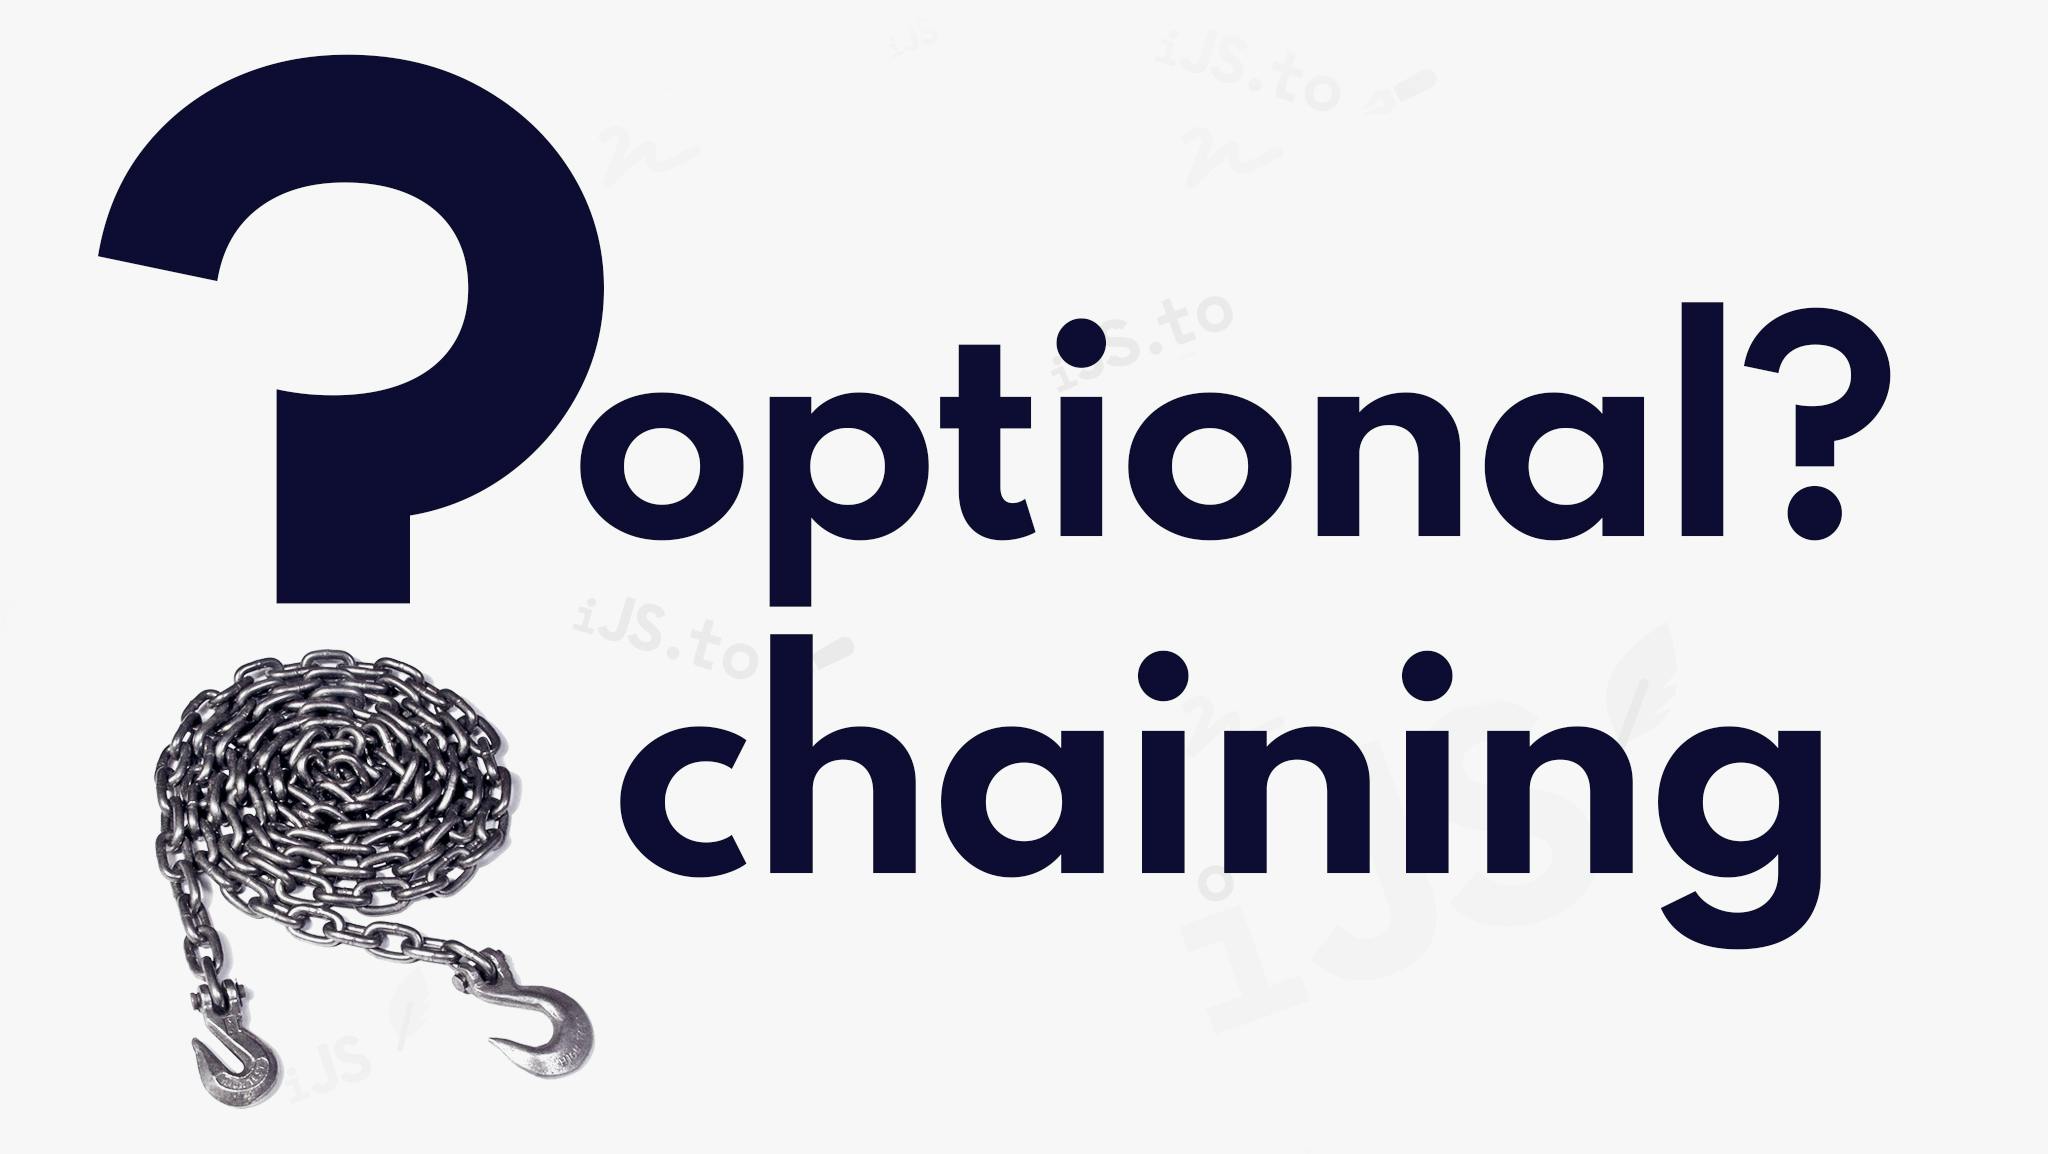 Optional chaining - a better way to do nullity checks in JavaScript